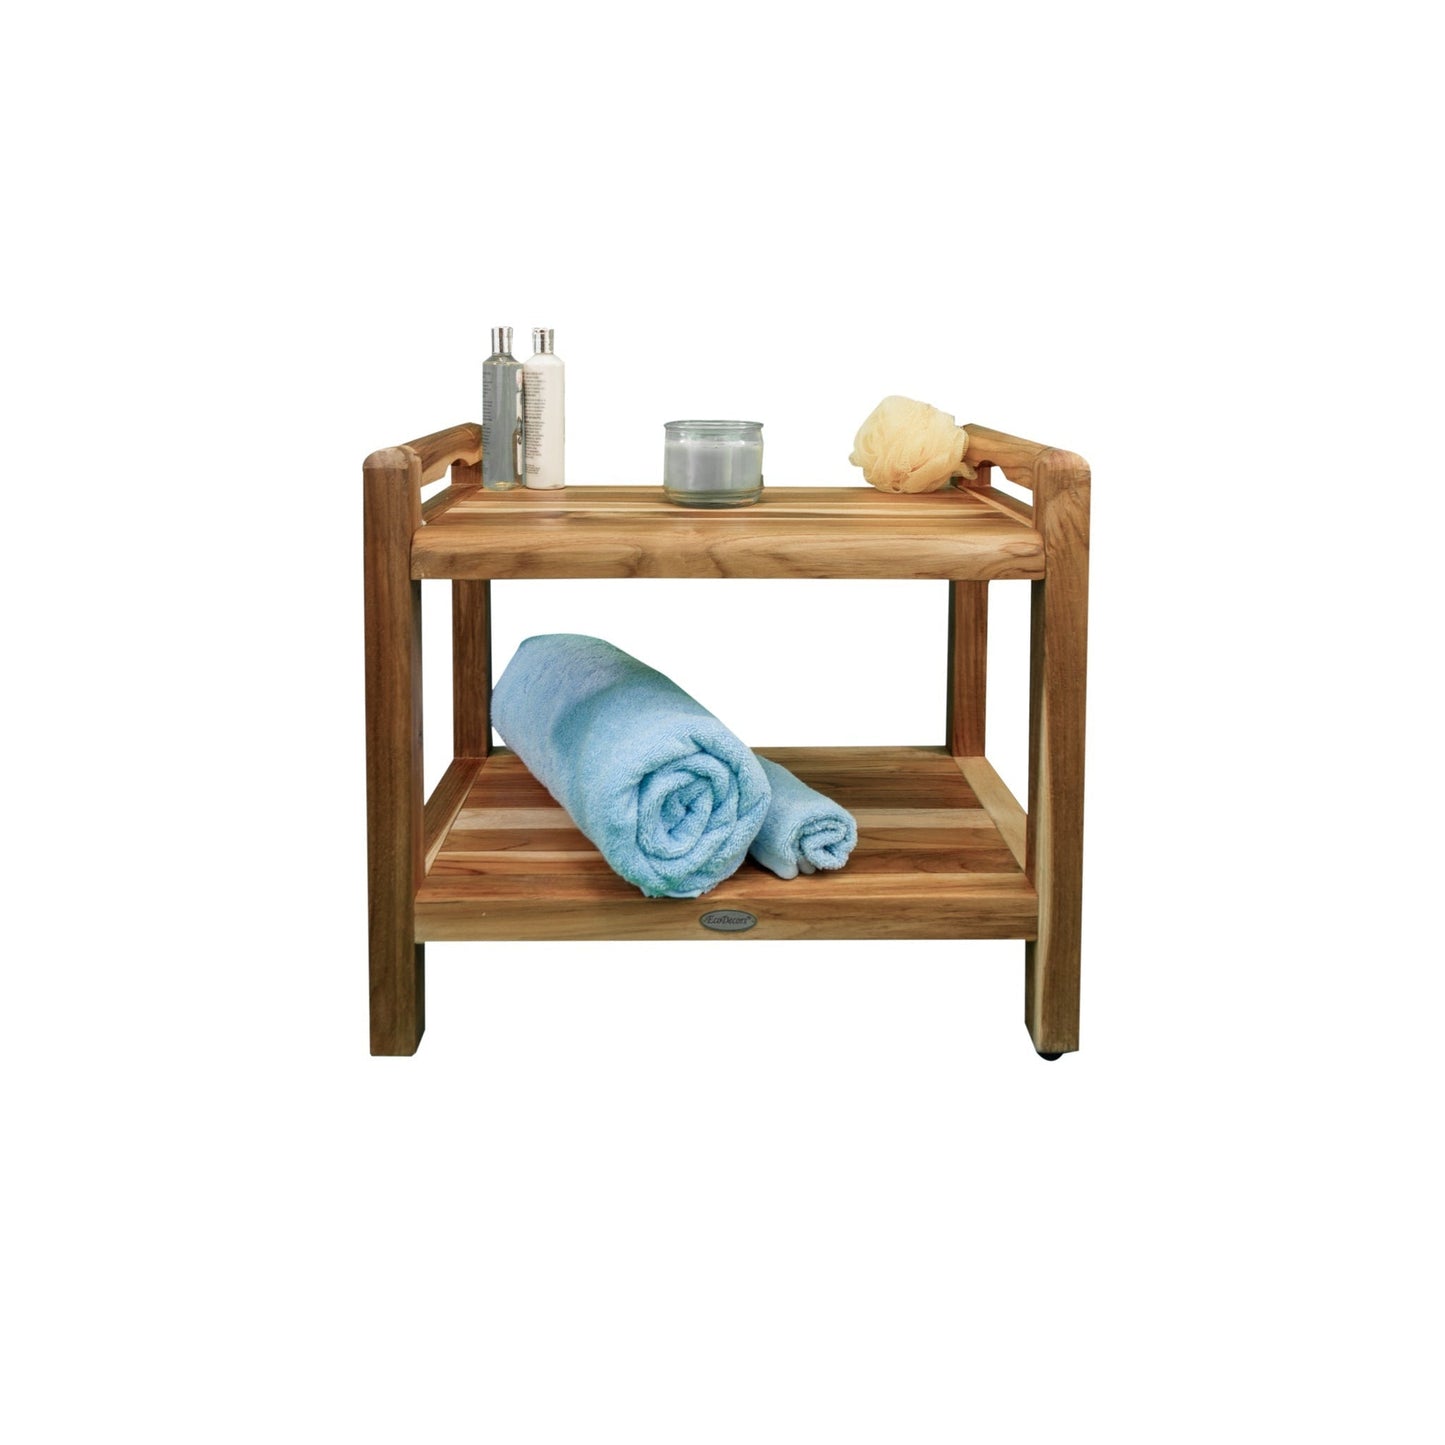 EcoDecors Eleganto 24" EarthyTeak Solid Teak Wood Shower Bench With LiftAide Arms and Shelf